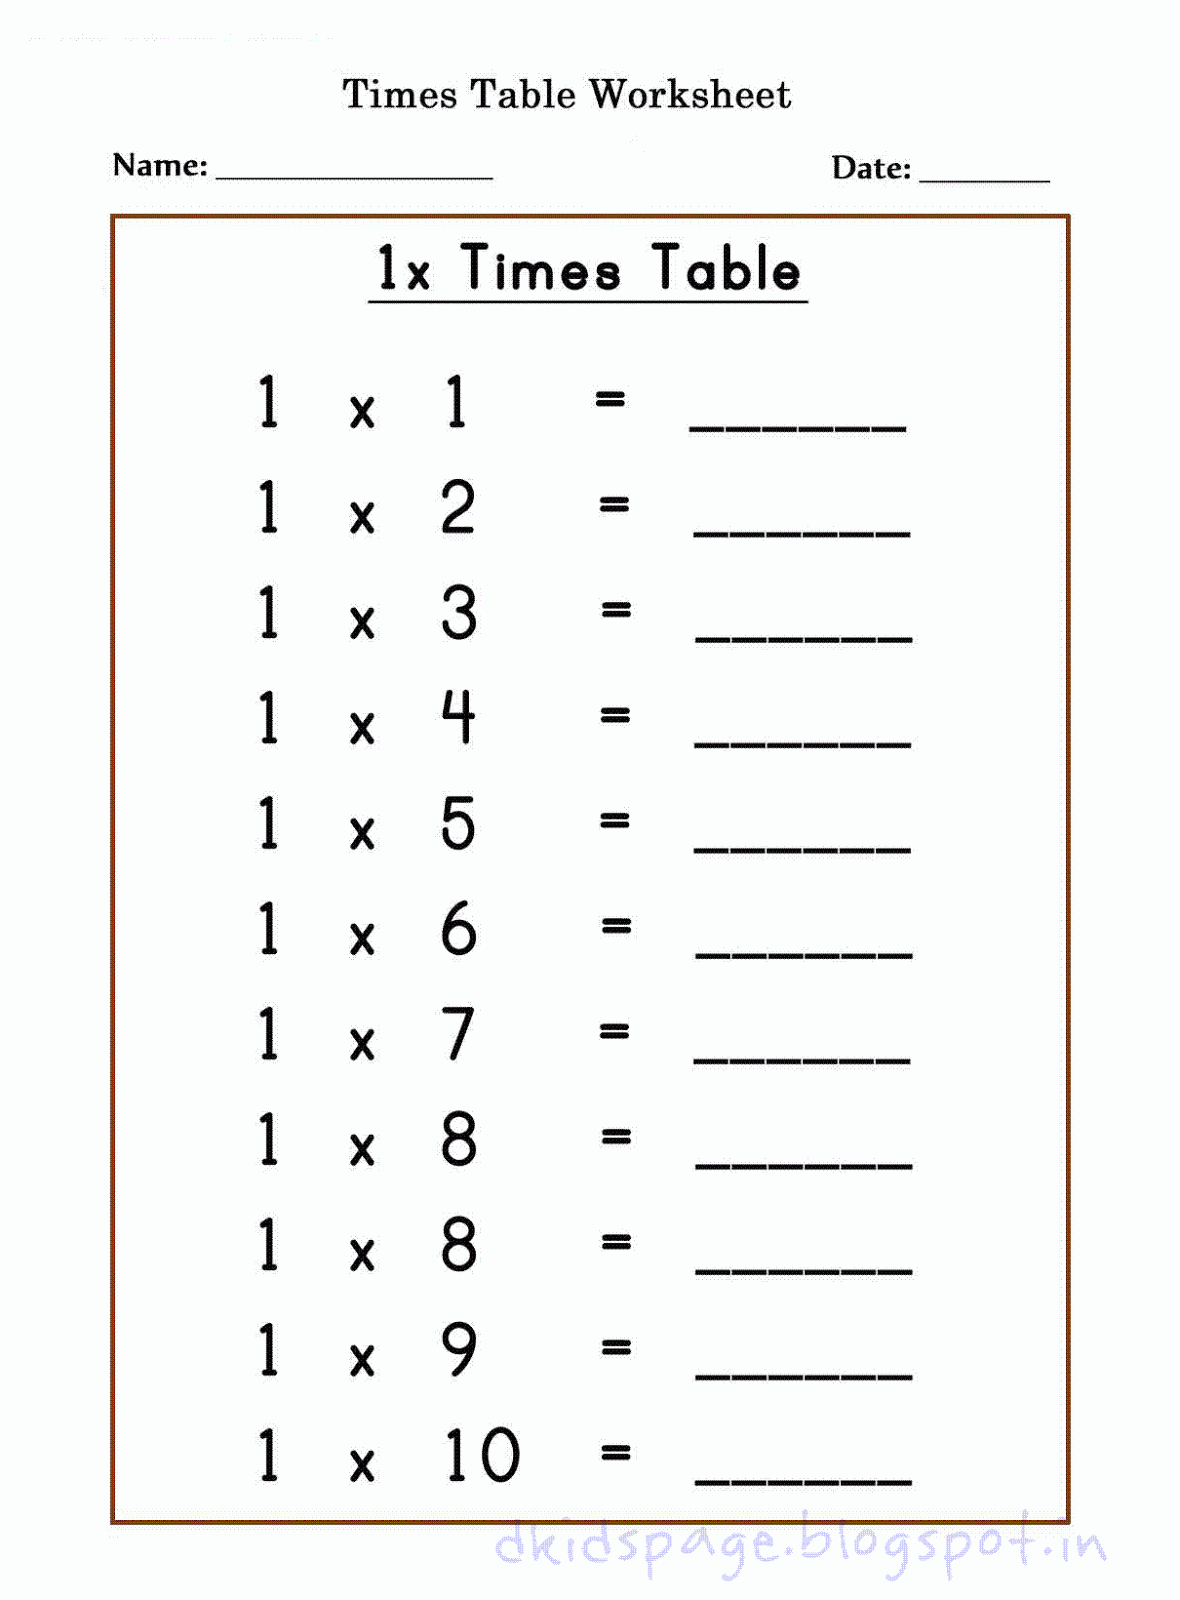 Kids Page Printable 1 X Times Table Worksheets for Free